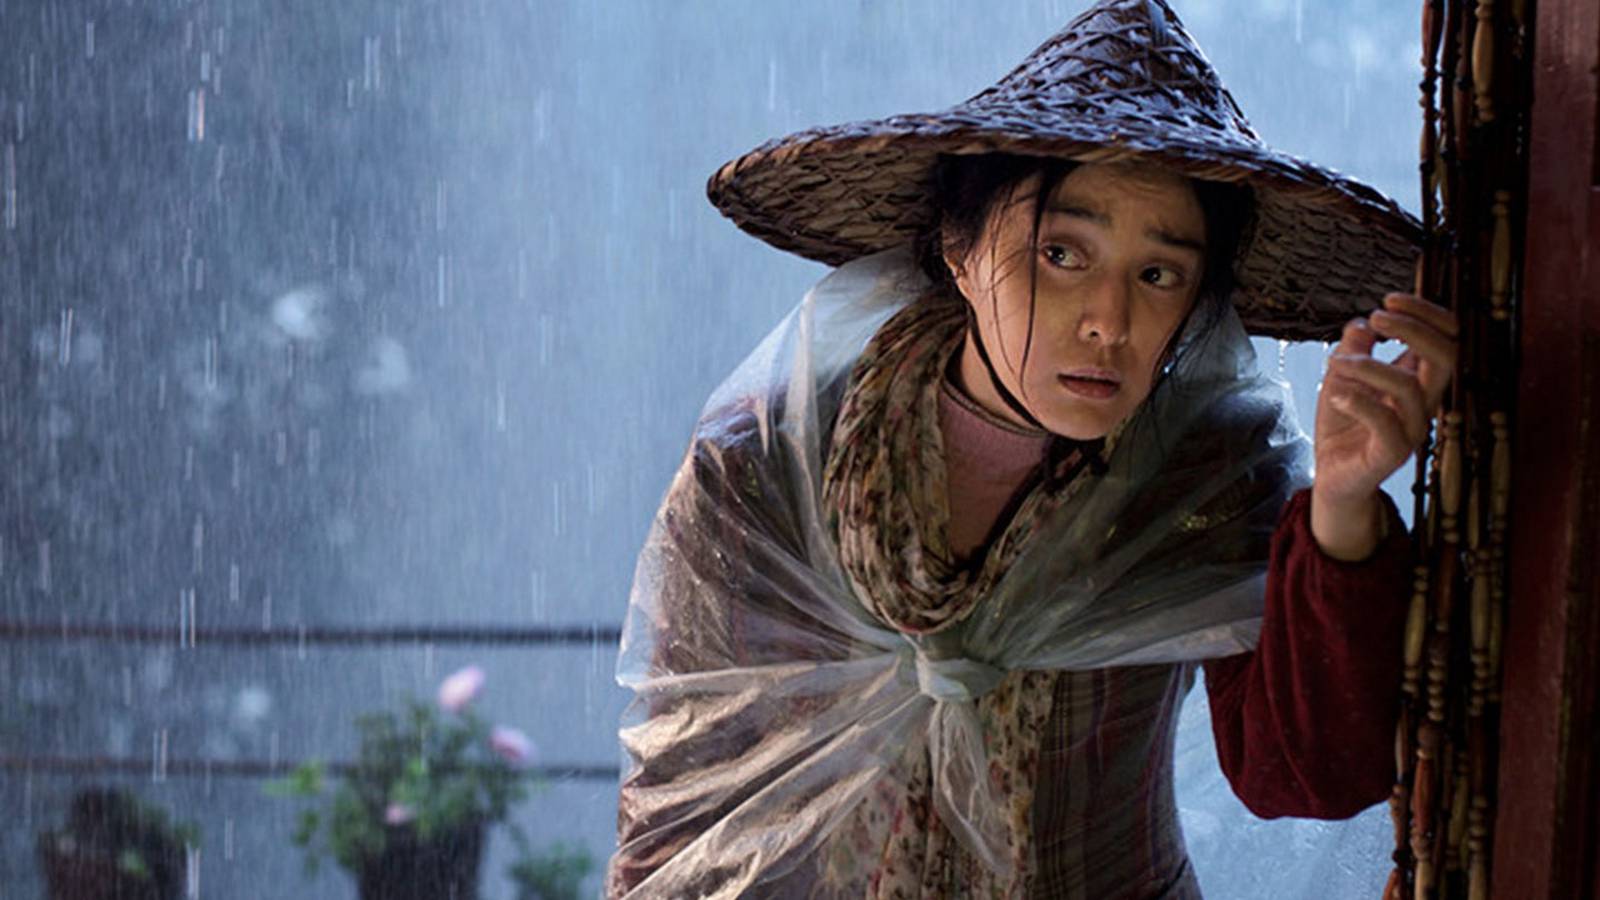 Feng Xiaogang wins for 'I Am Not Madame Bovary